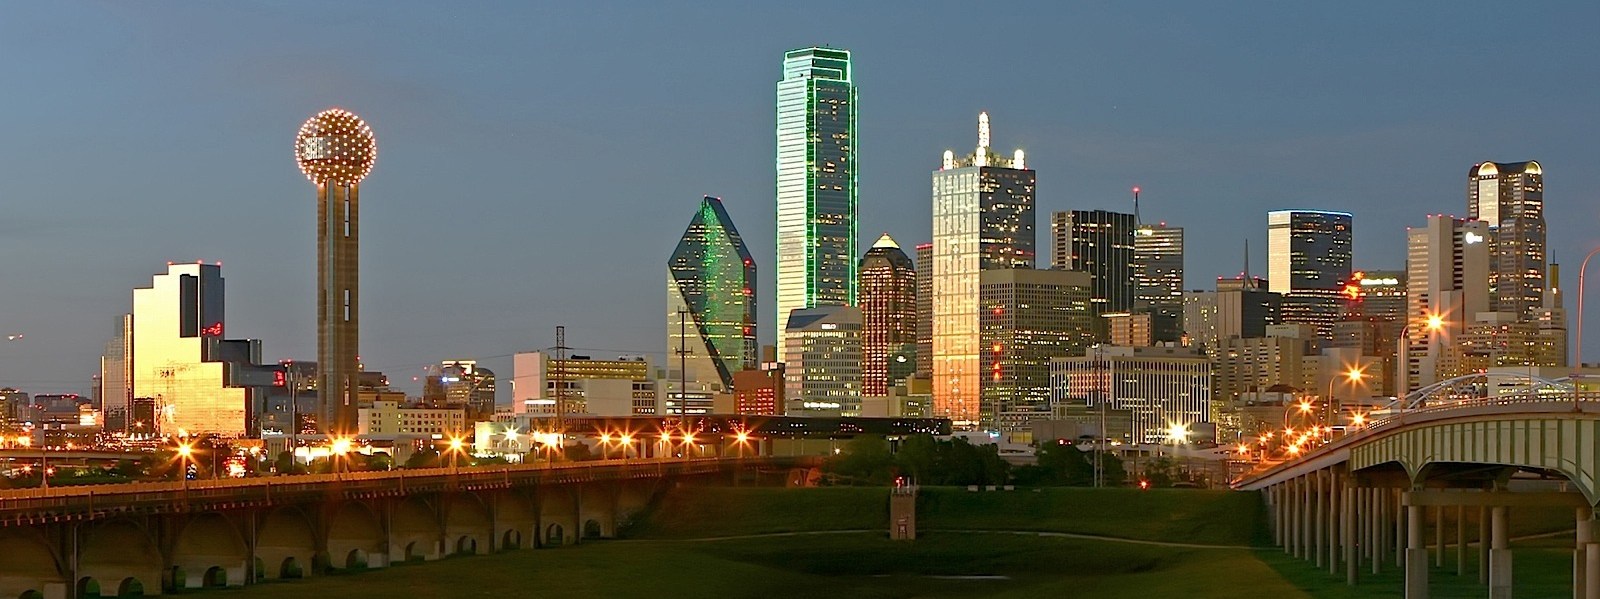 Images of Dallas | 1600x599